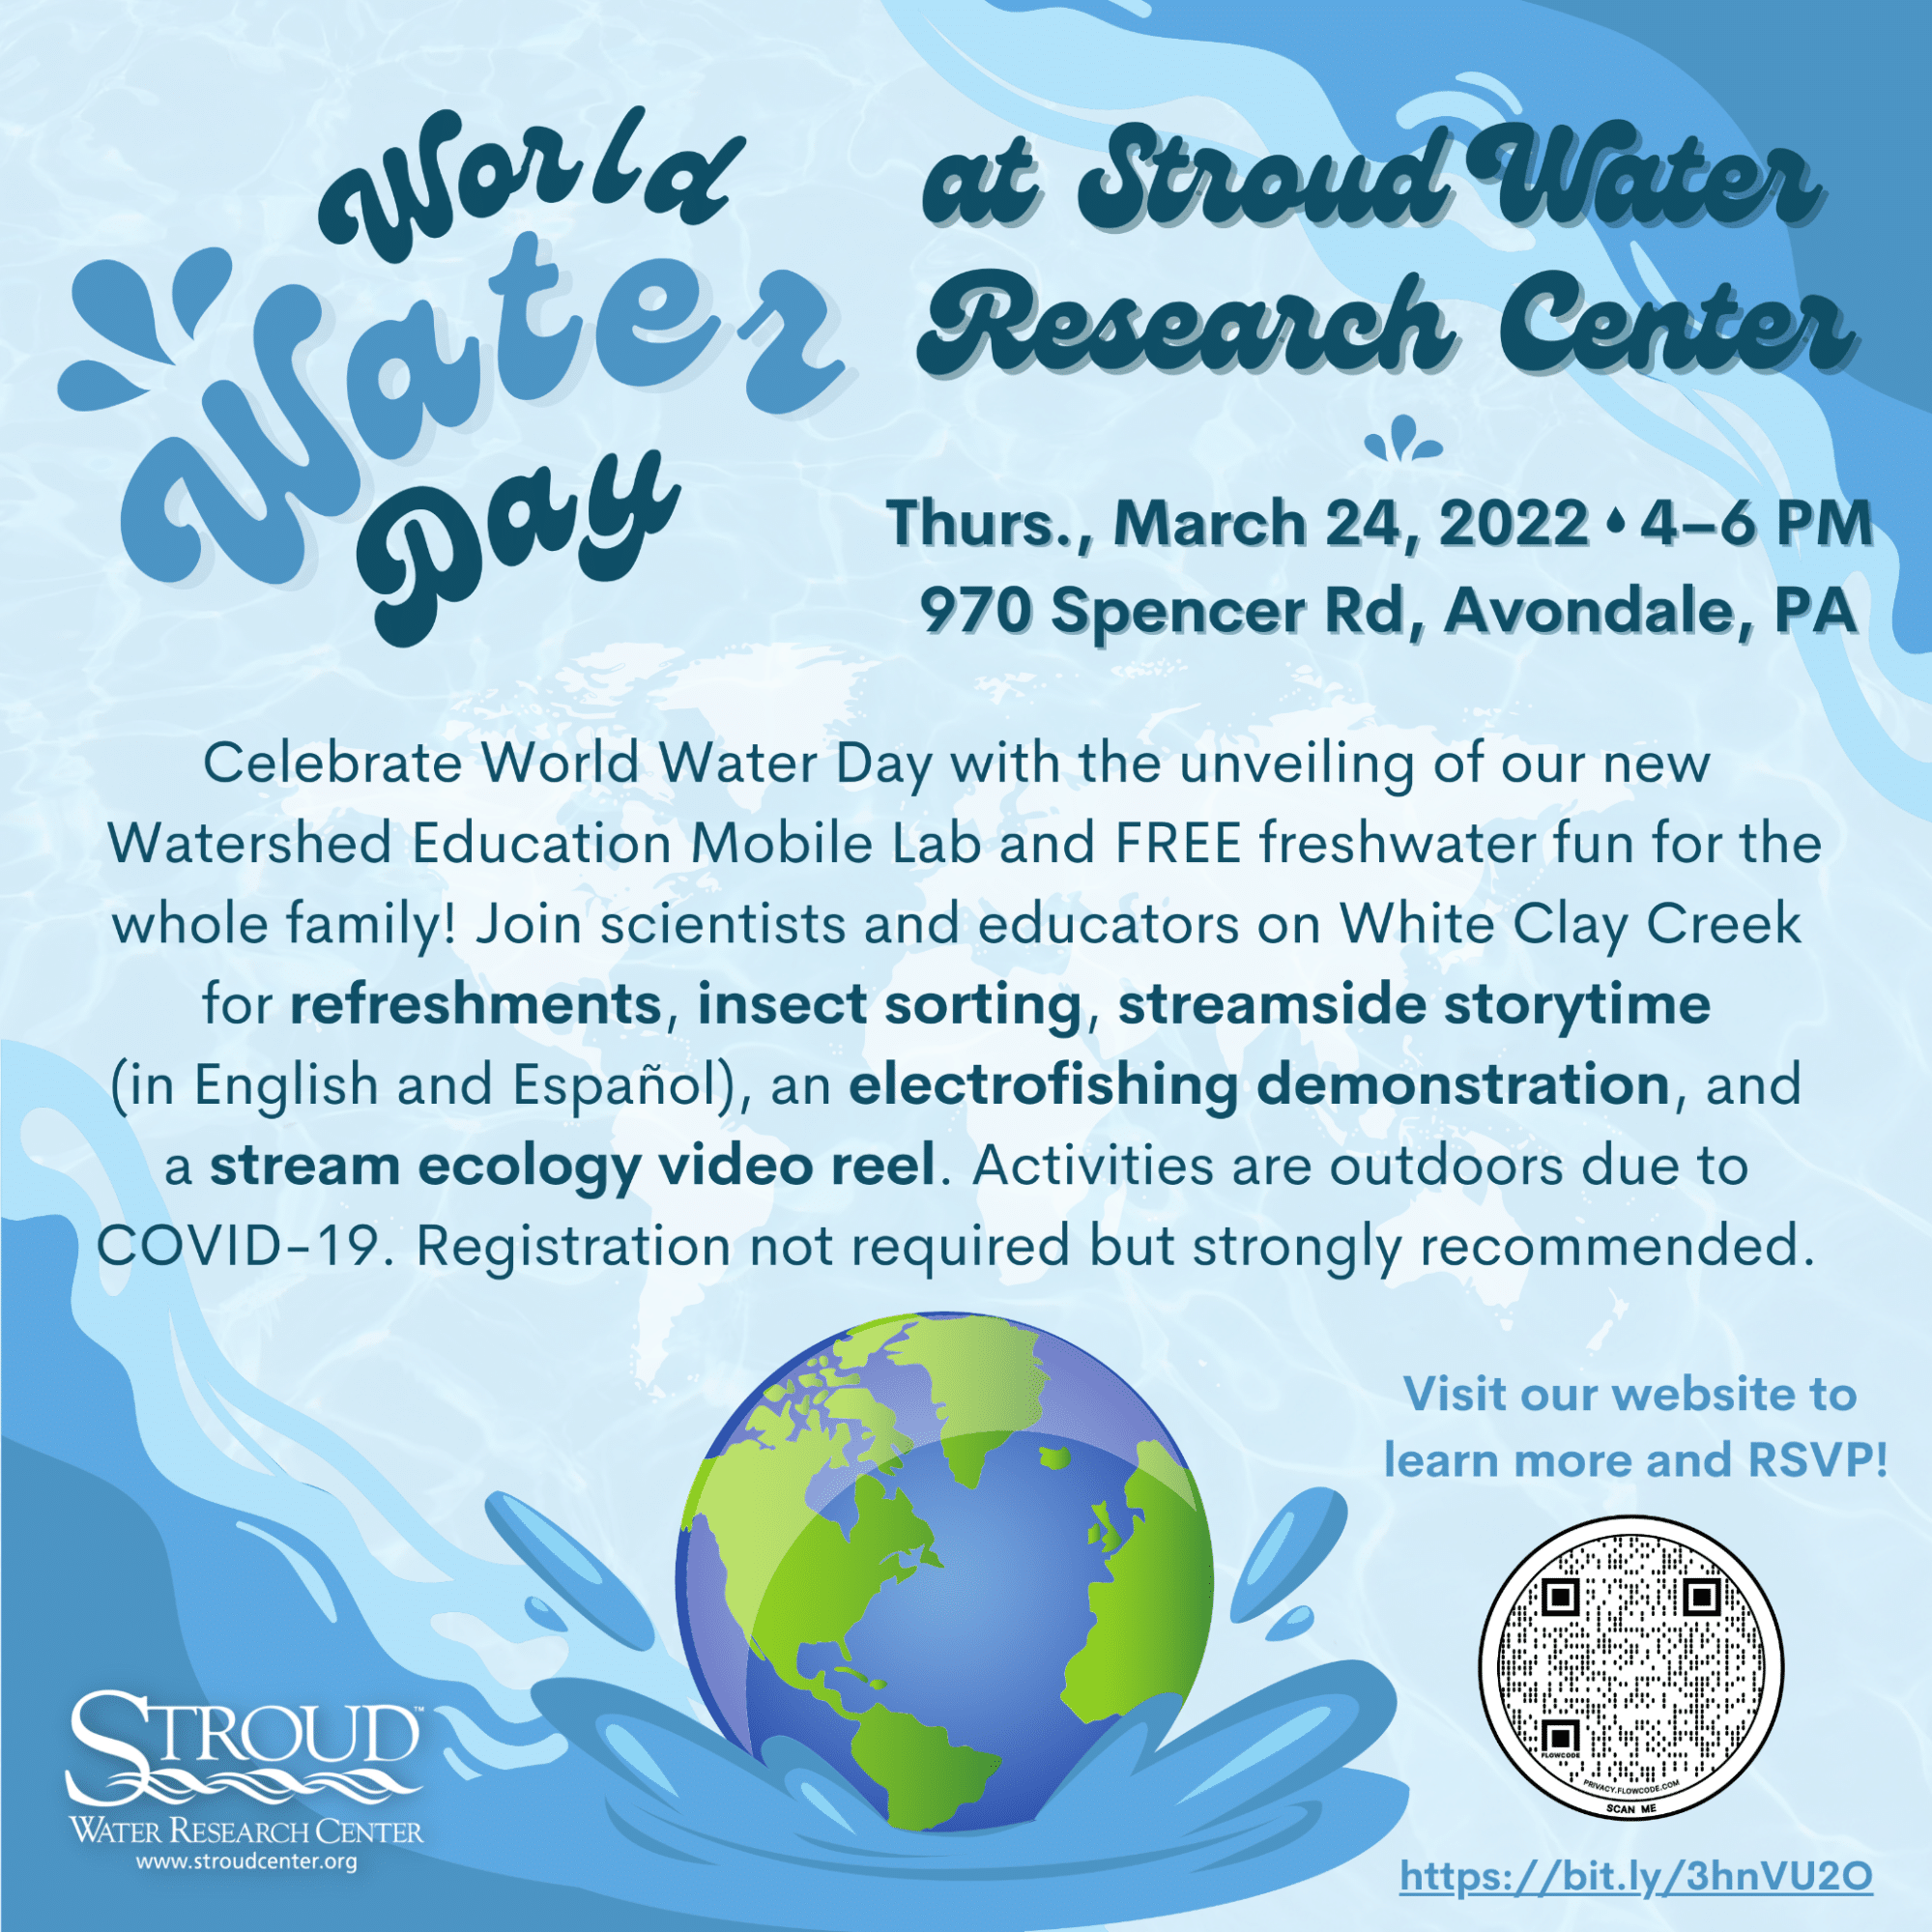 Celebrate World Water Day at Stroud Water Research Center